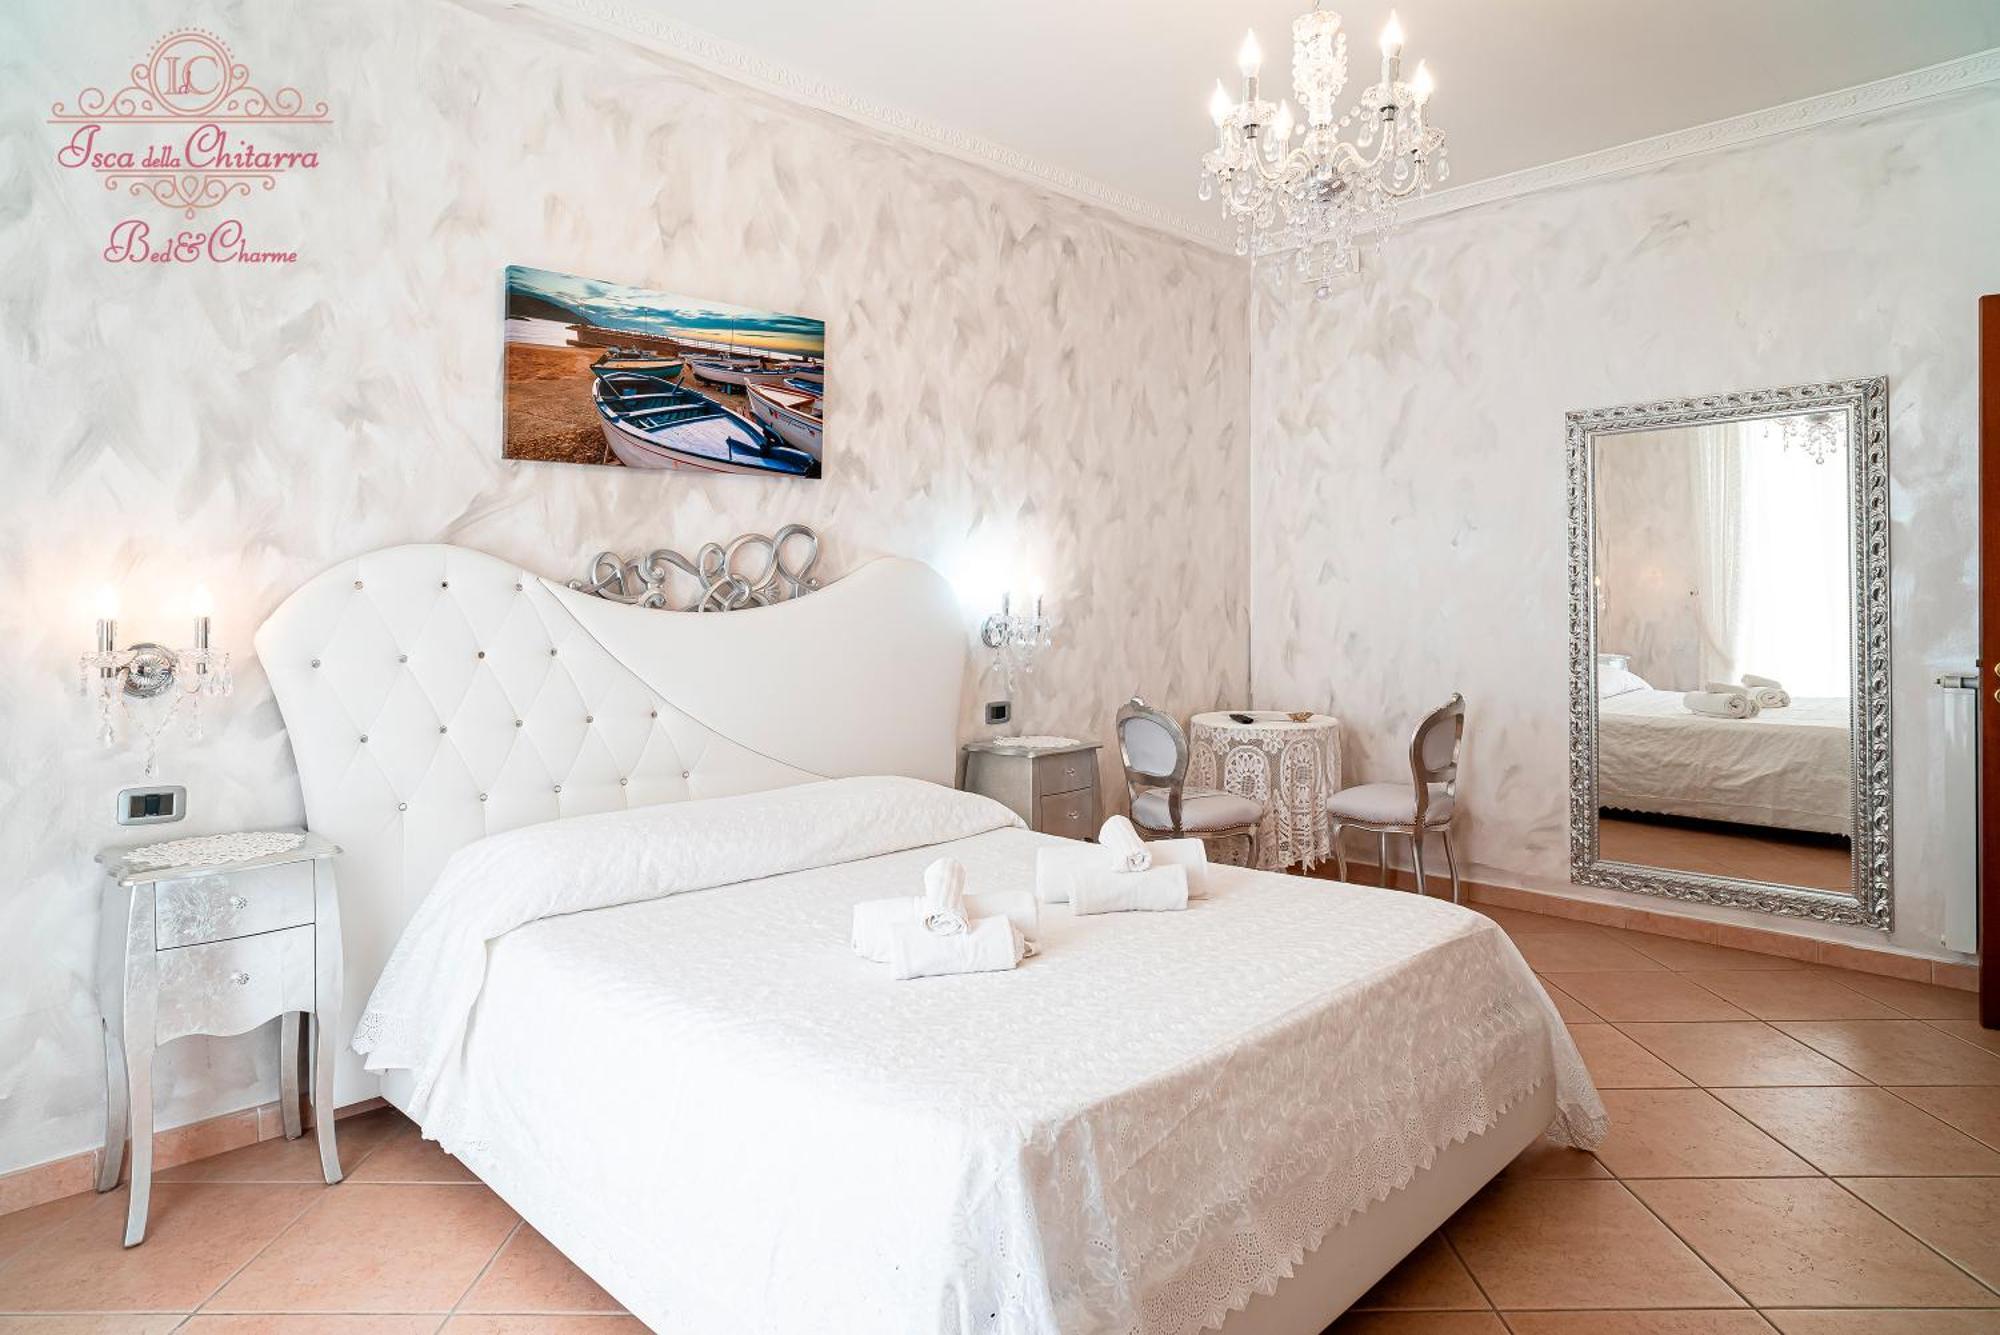 Isca Della Chitarra Bed And Charme Bed and Breakfast Castellabate Buitenkant foto